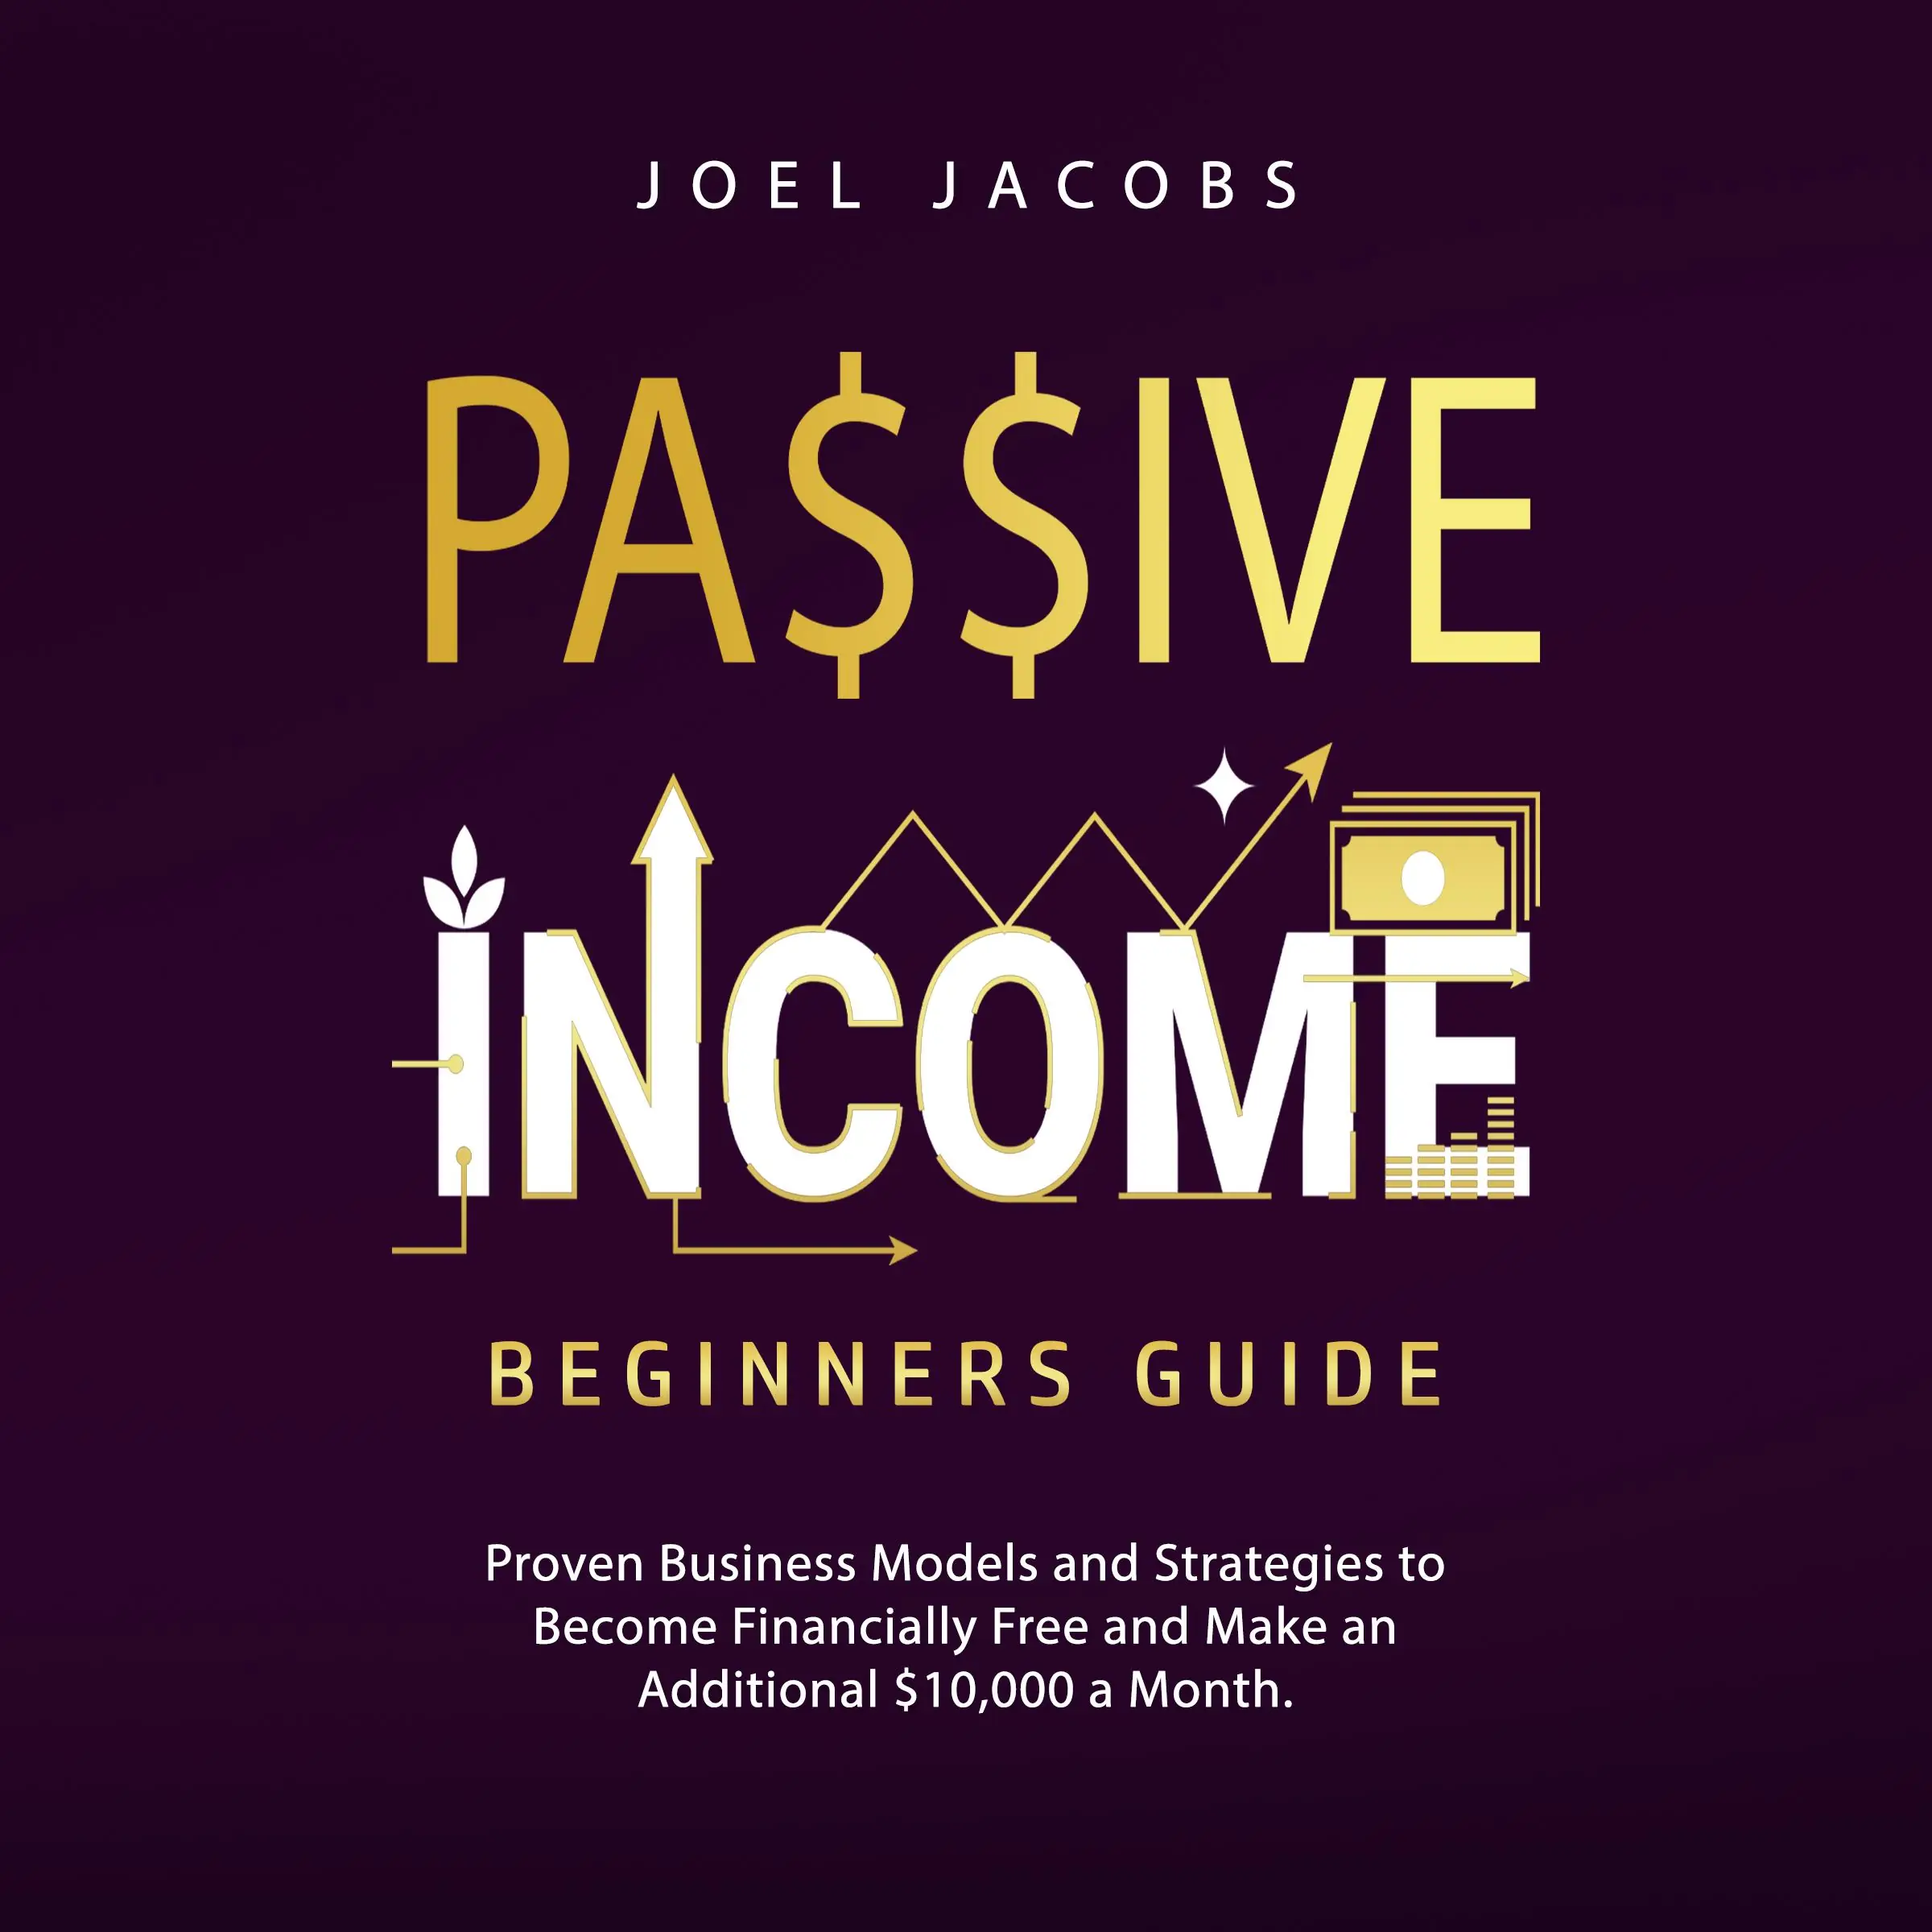 Passive Income – Beginners Guide: Proven Business Models and Strategies to Become Financially Free and Make an Additional $10,000 a Month Audiobook by Joel Jacobs